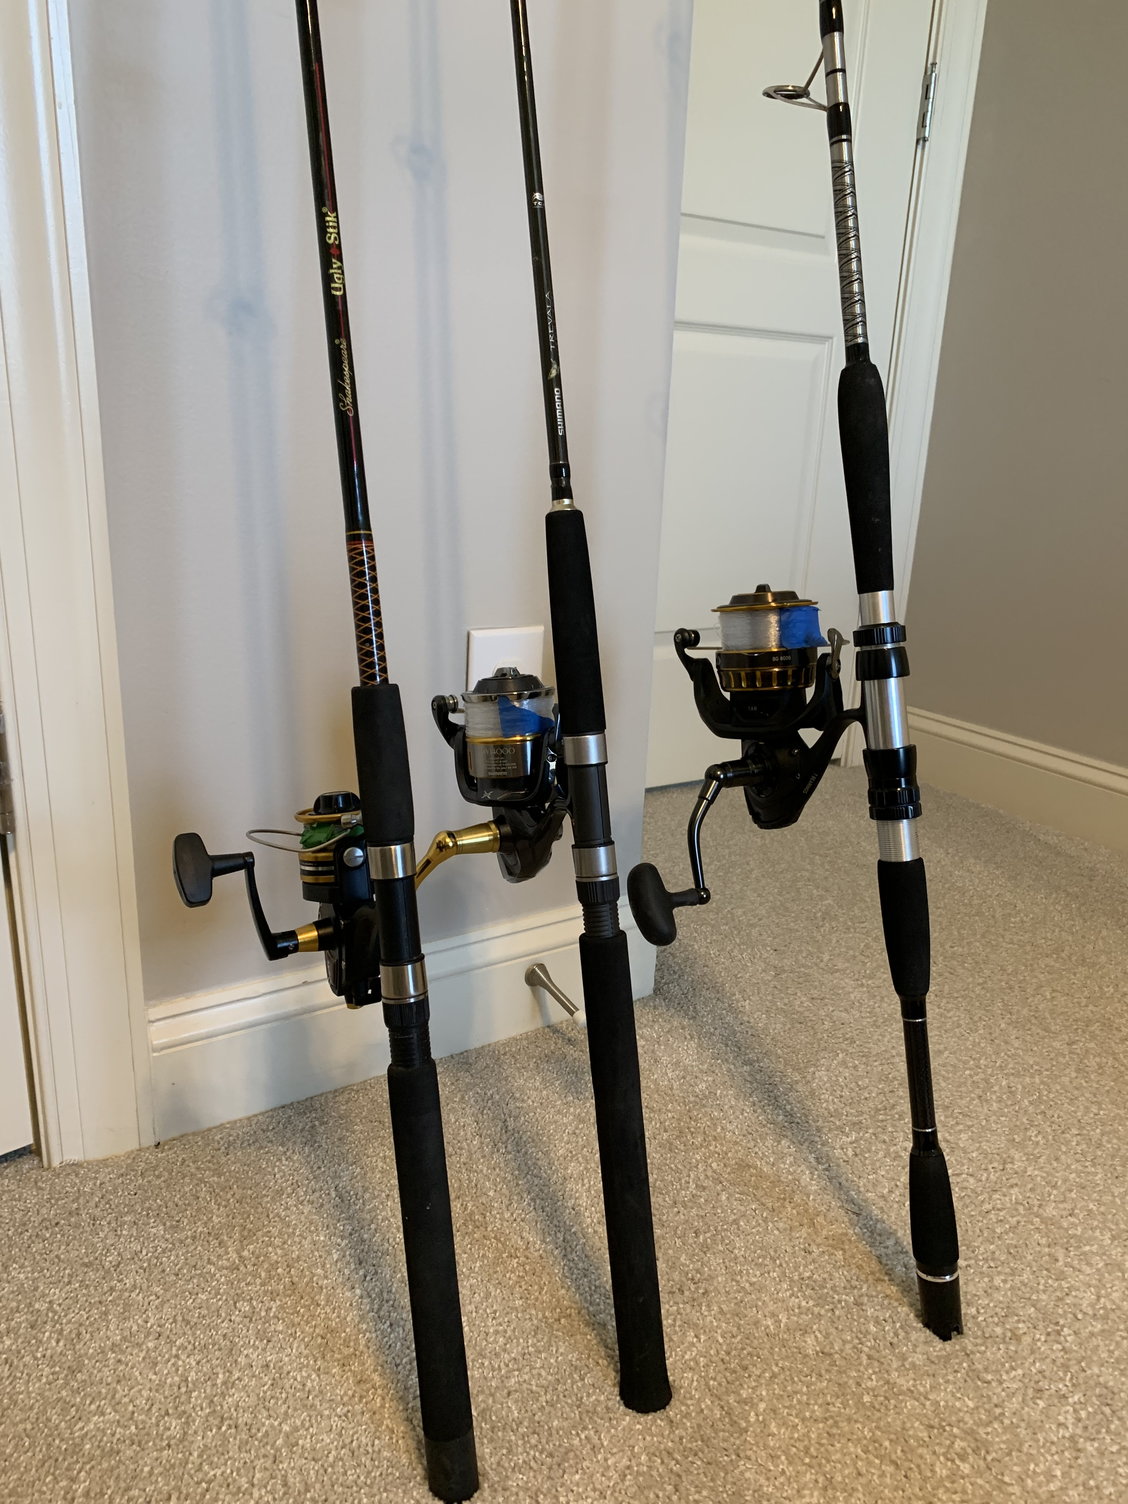 Spinning Rod for Big Snapper - The Hull Truth - Boating and Fishing Forum